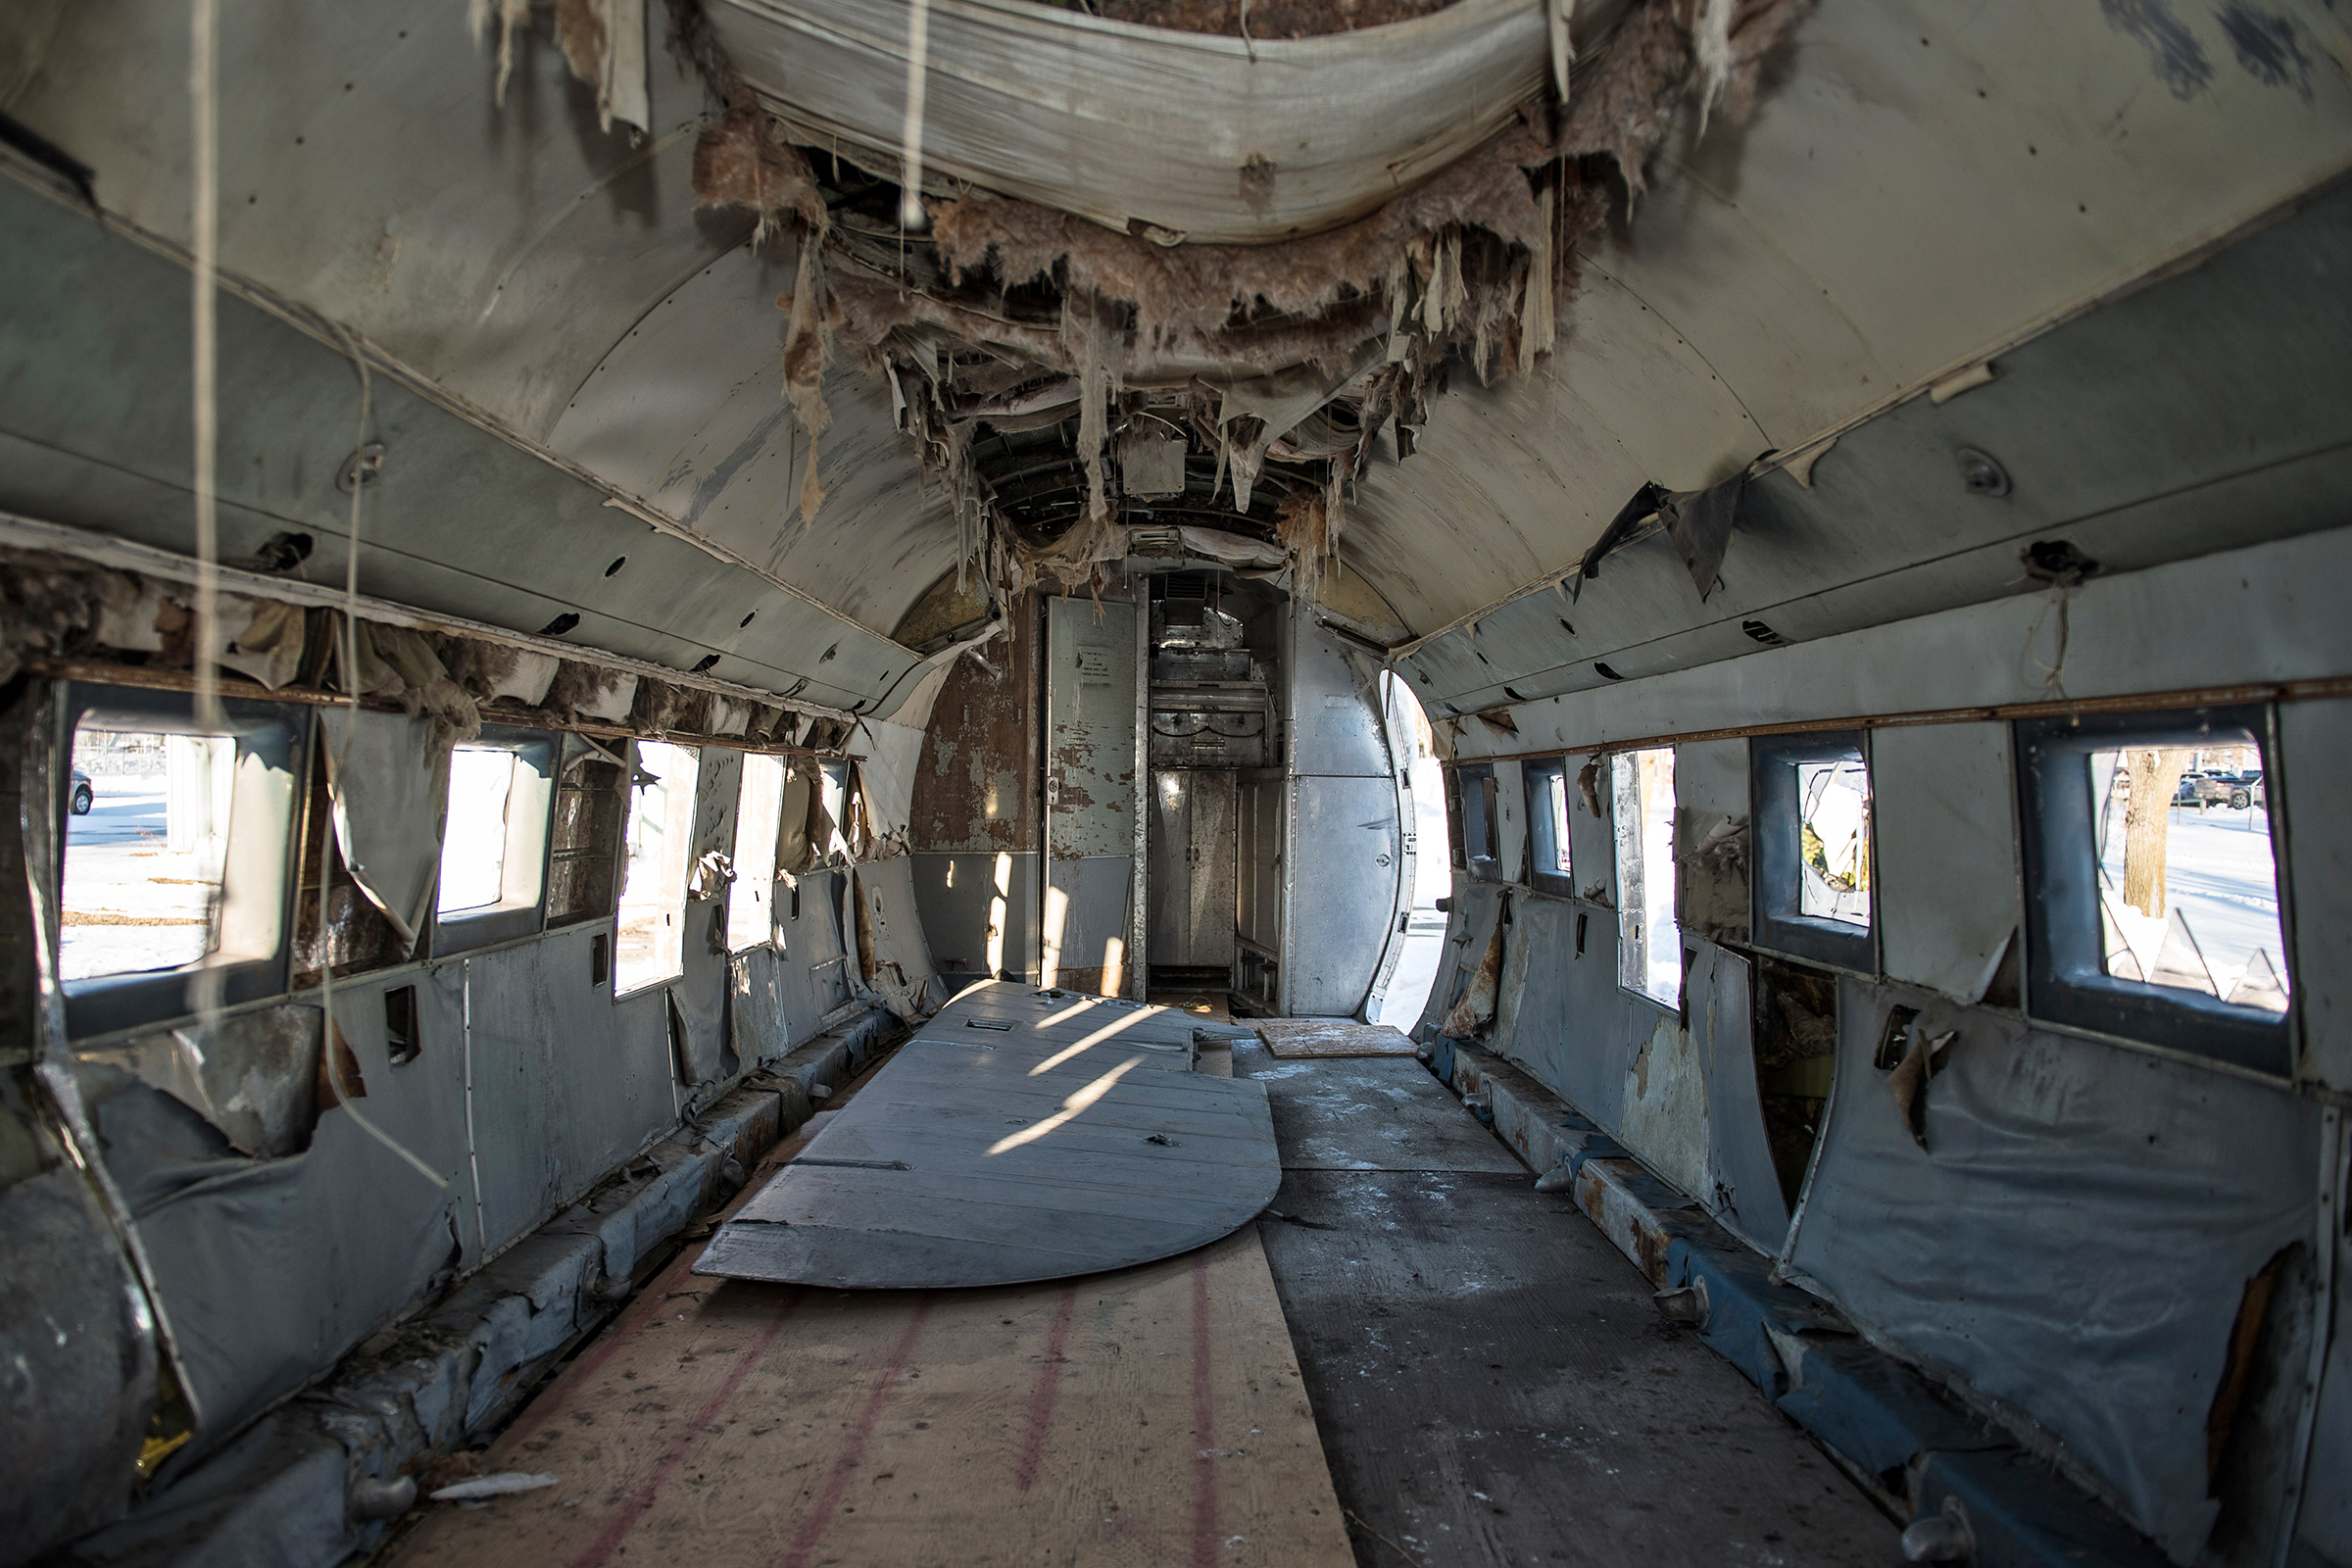 The interior of “Spirit of Ostra Brama”, a Royal Air Force C-47 Dakota aircraft flown by Polish aircrew during the Second World War. PHOTO: Corporal Darryl Hepner, WG2018-0097-017